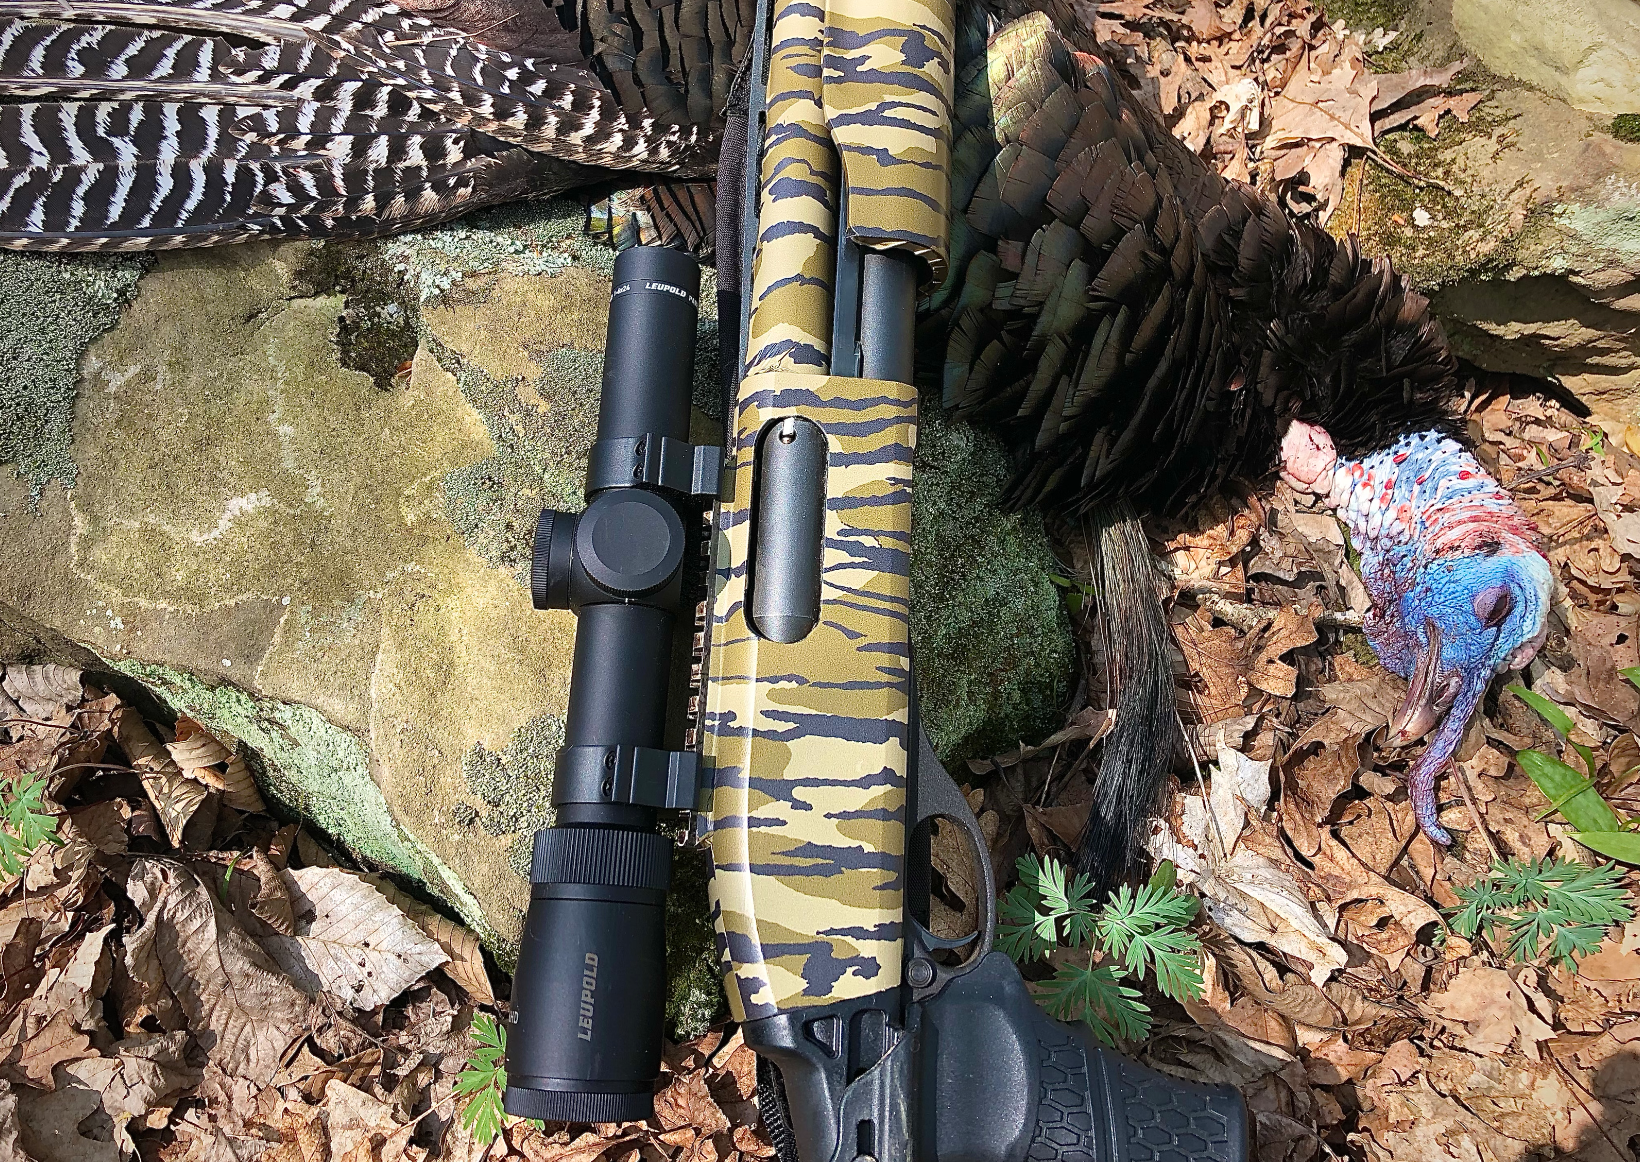 Scopes for turkey hunting.